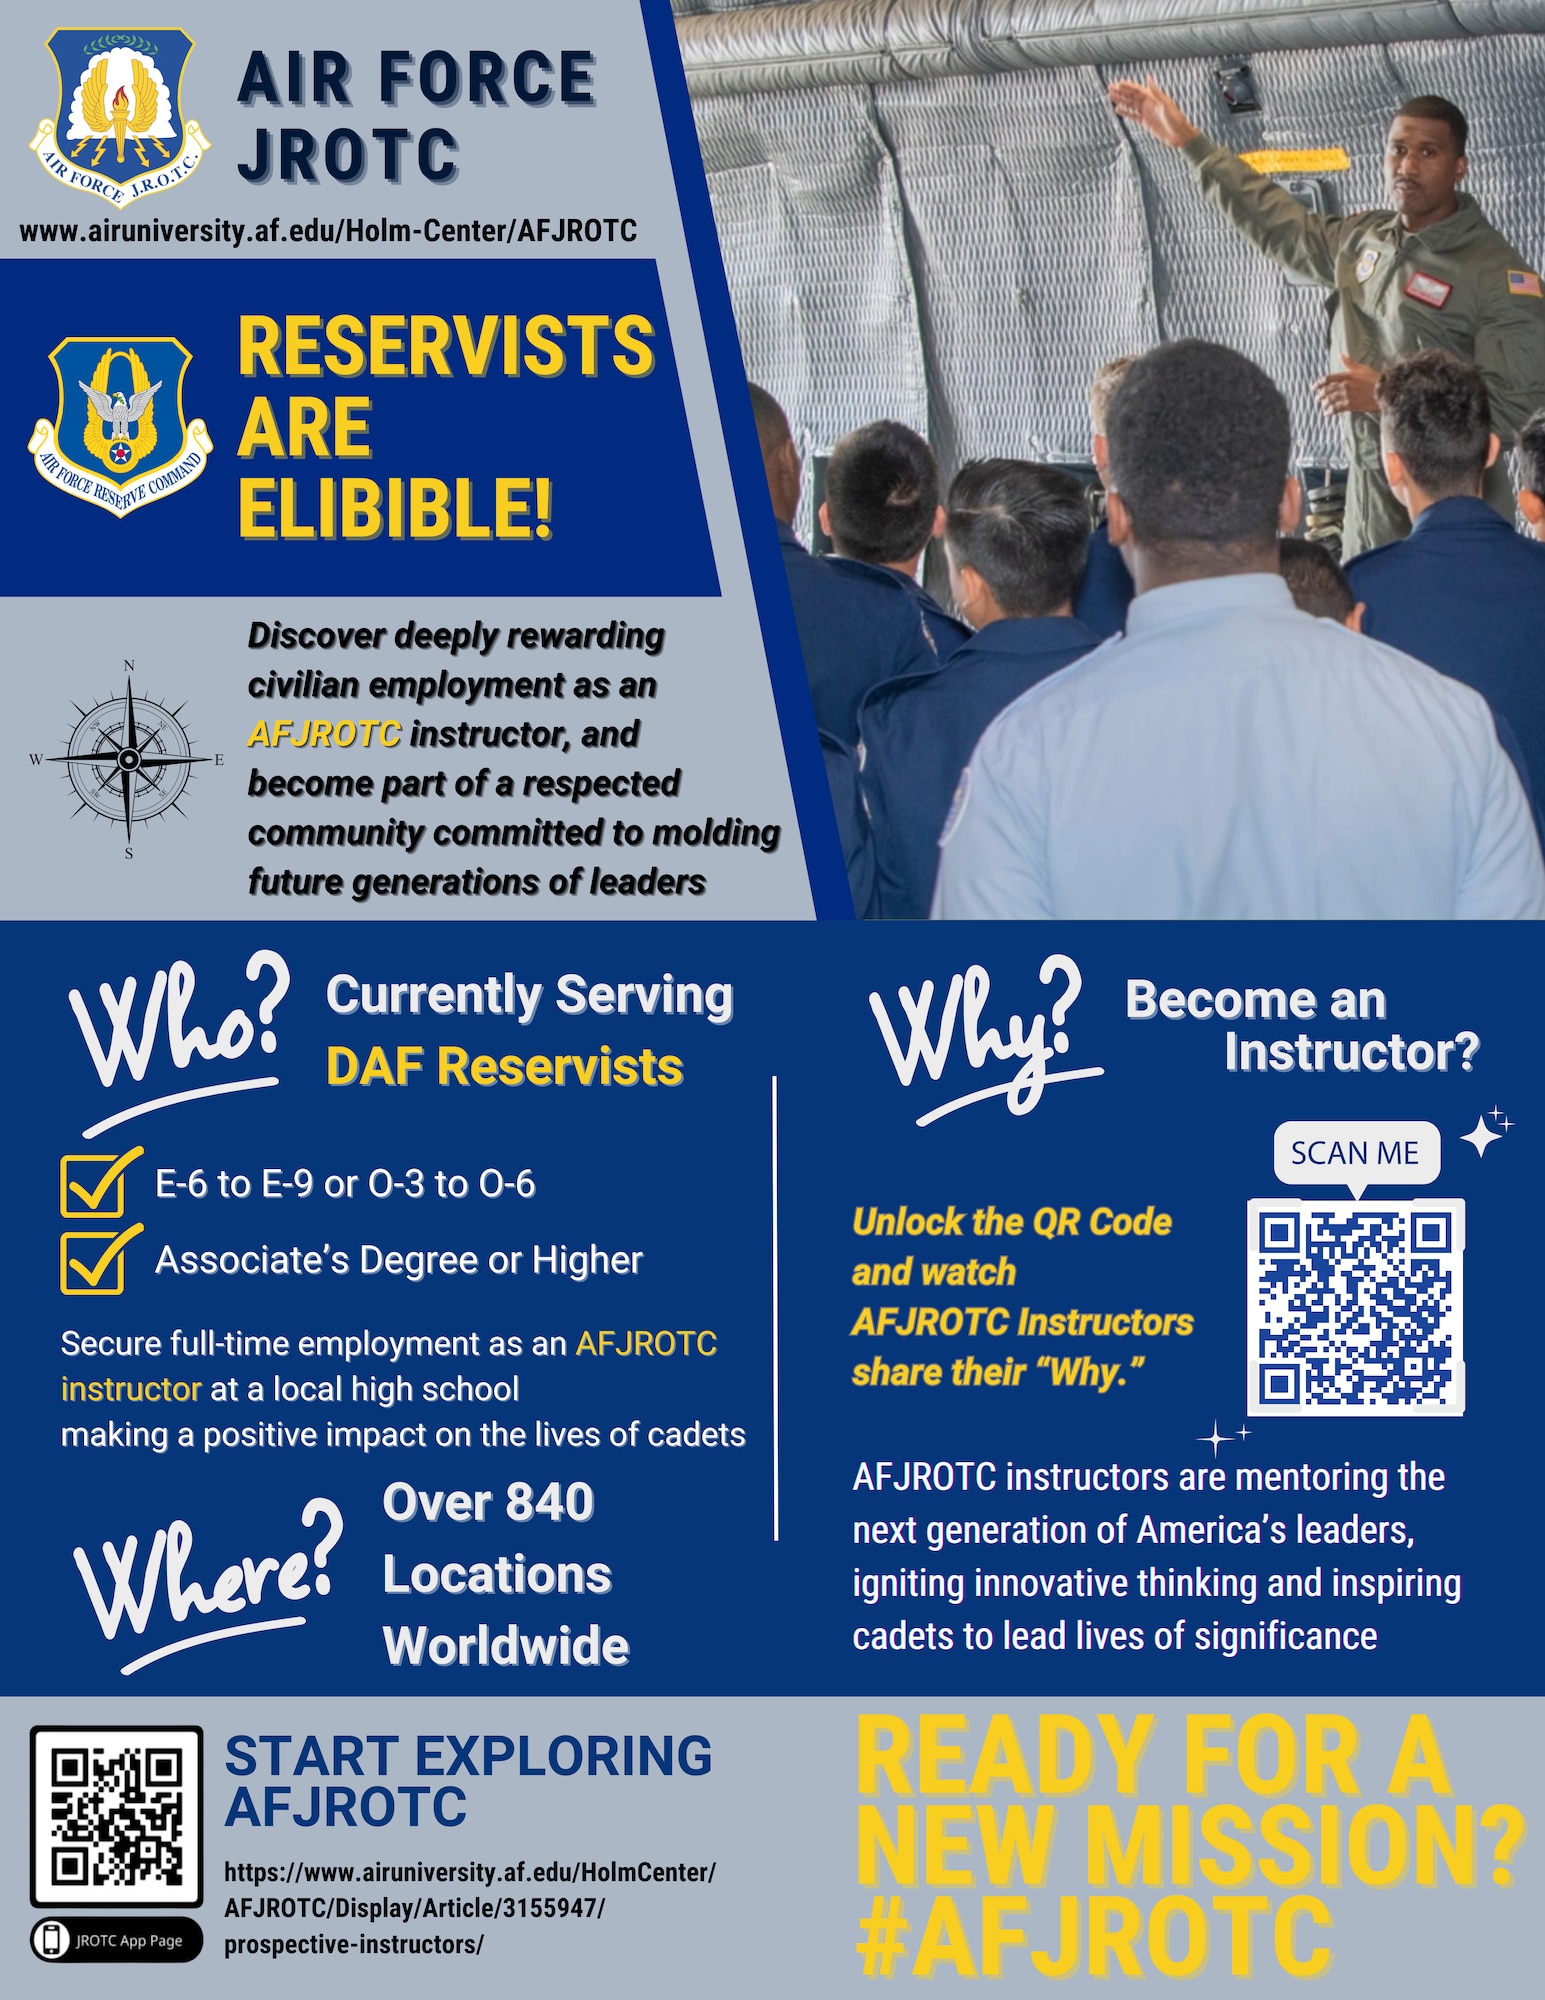 Drilling Air Force Reservists are now eligible to apply as Air Force Junior ROTC instructors.